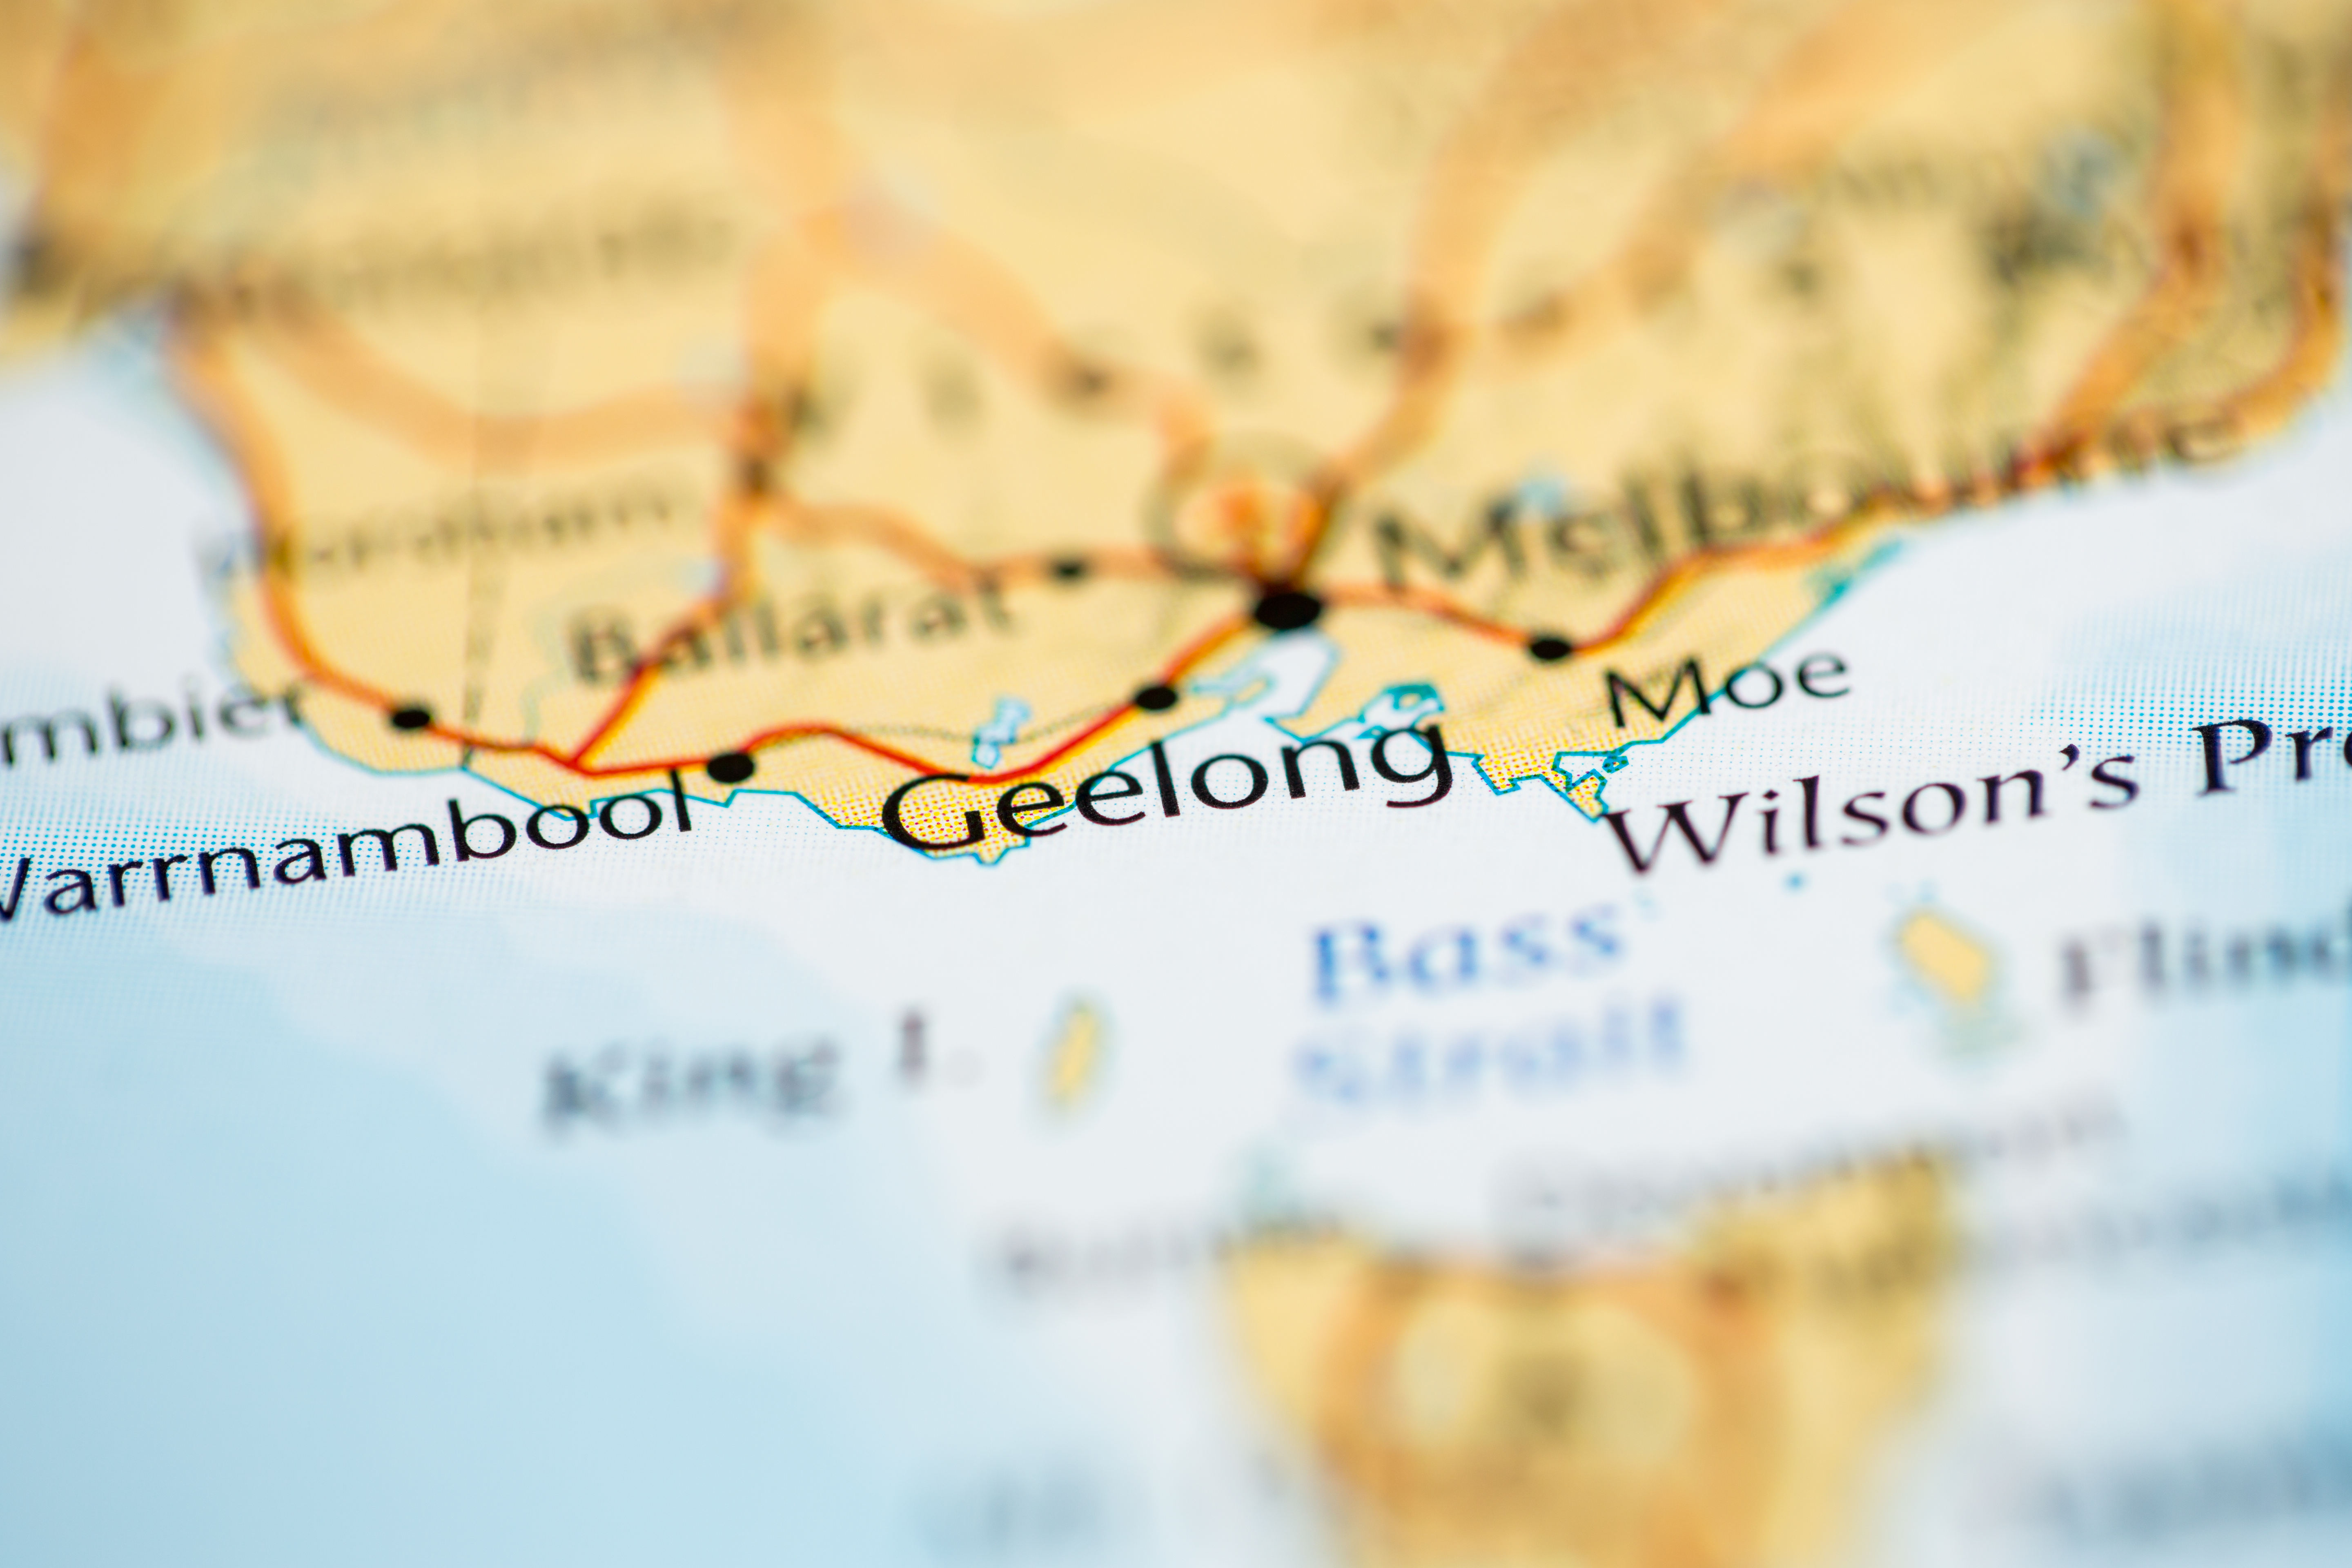 The Australian Advanced Manufacturing Growth Centre will support a consortium of carbon fiber and composite manufacturers located in the city of Geelong.